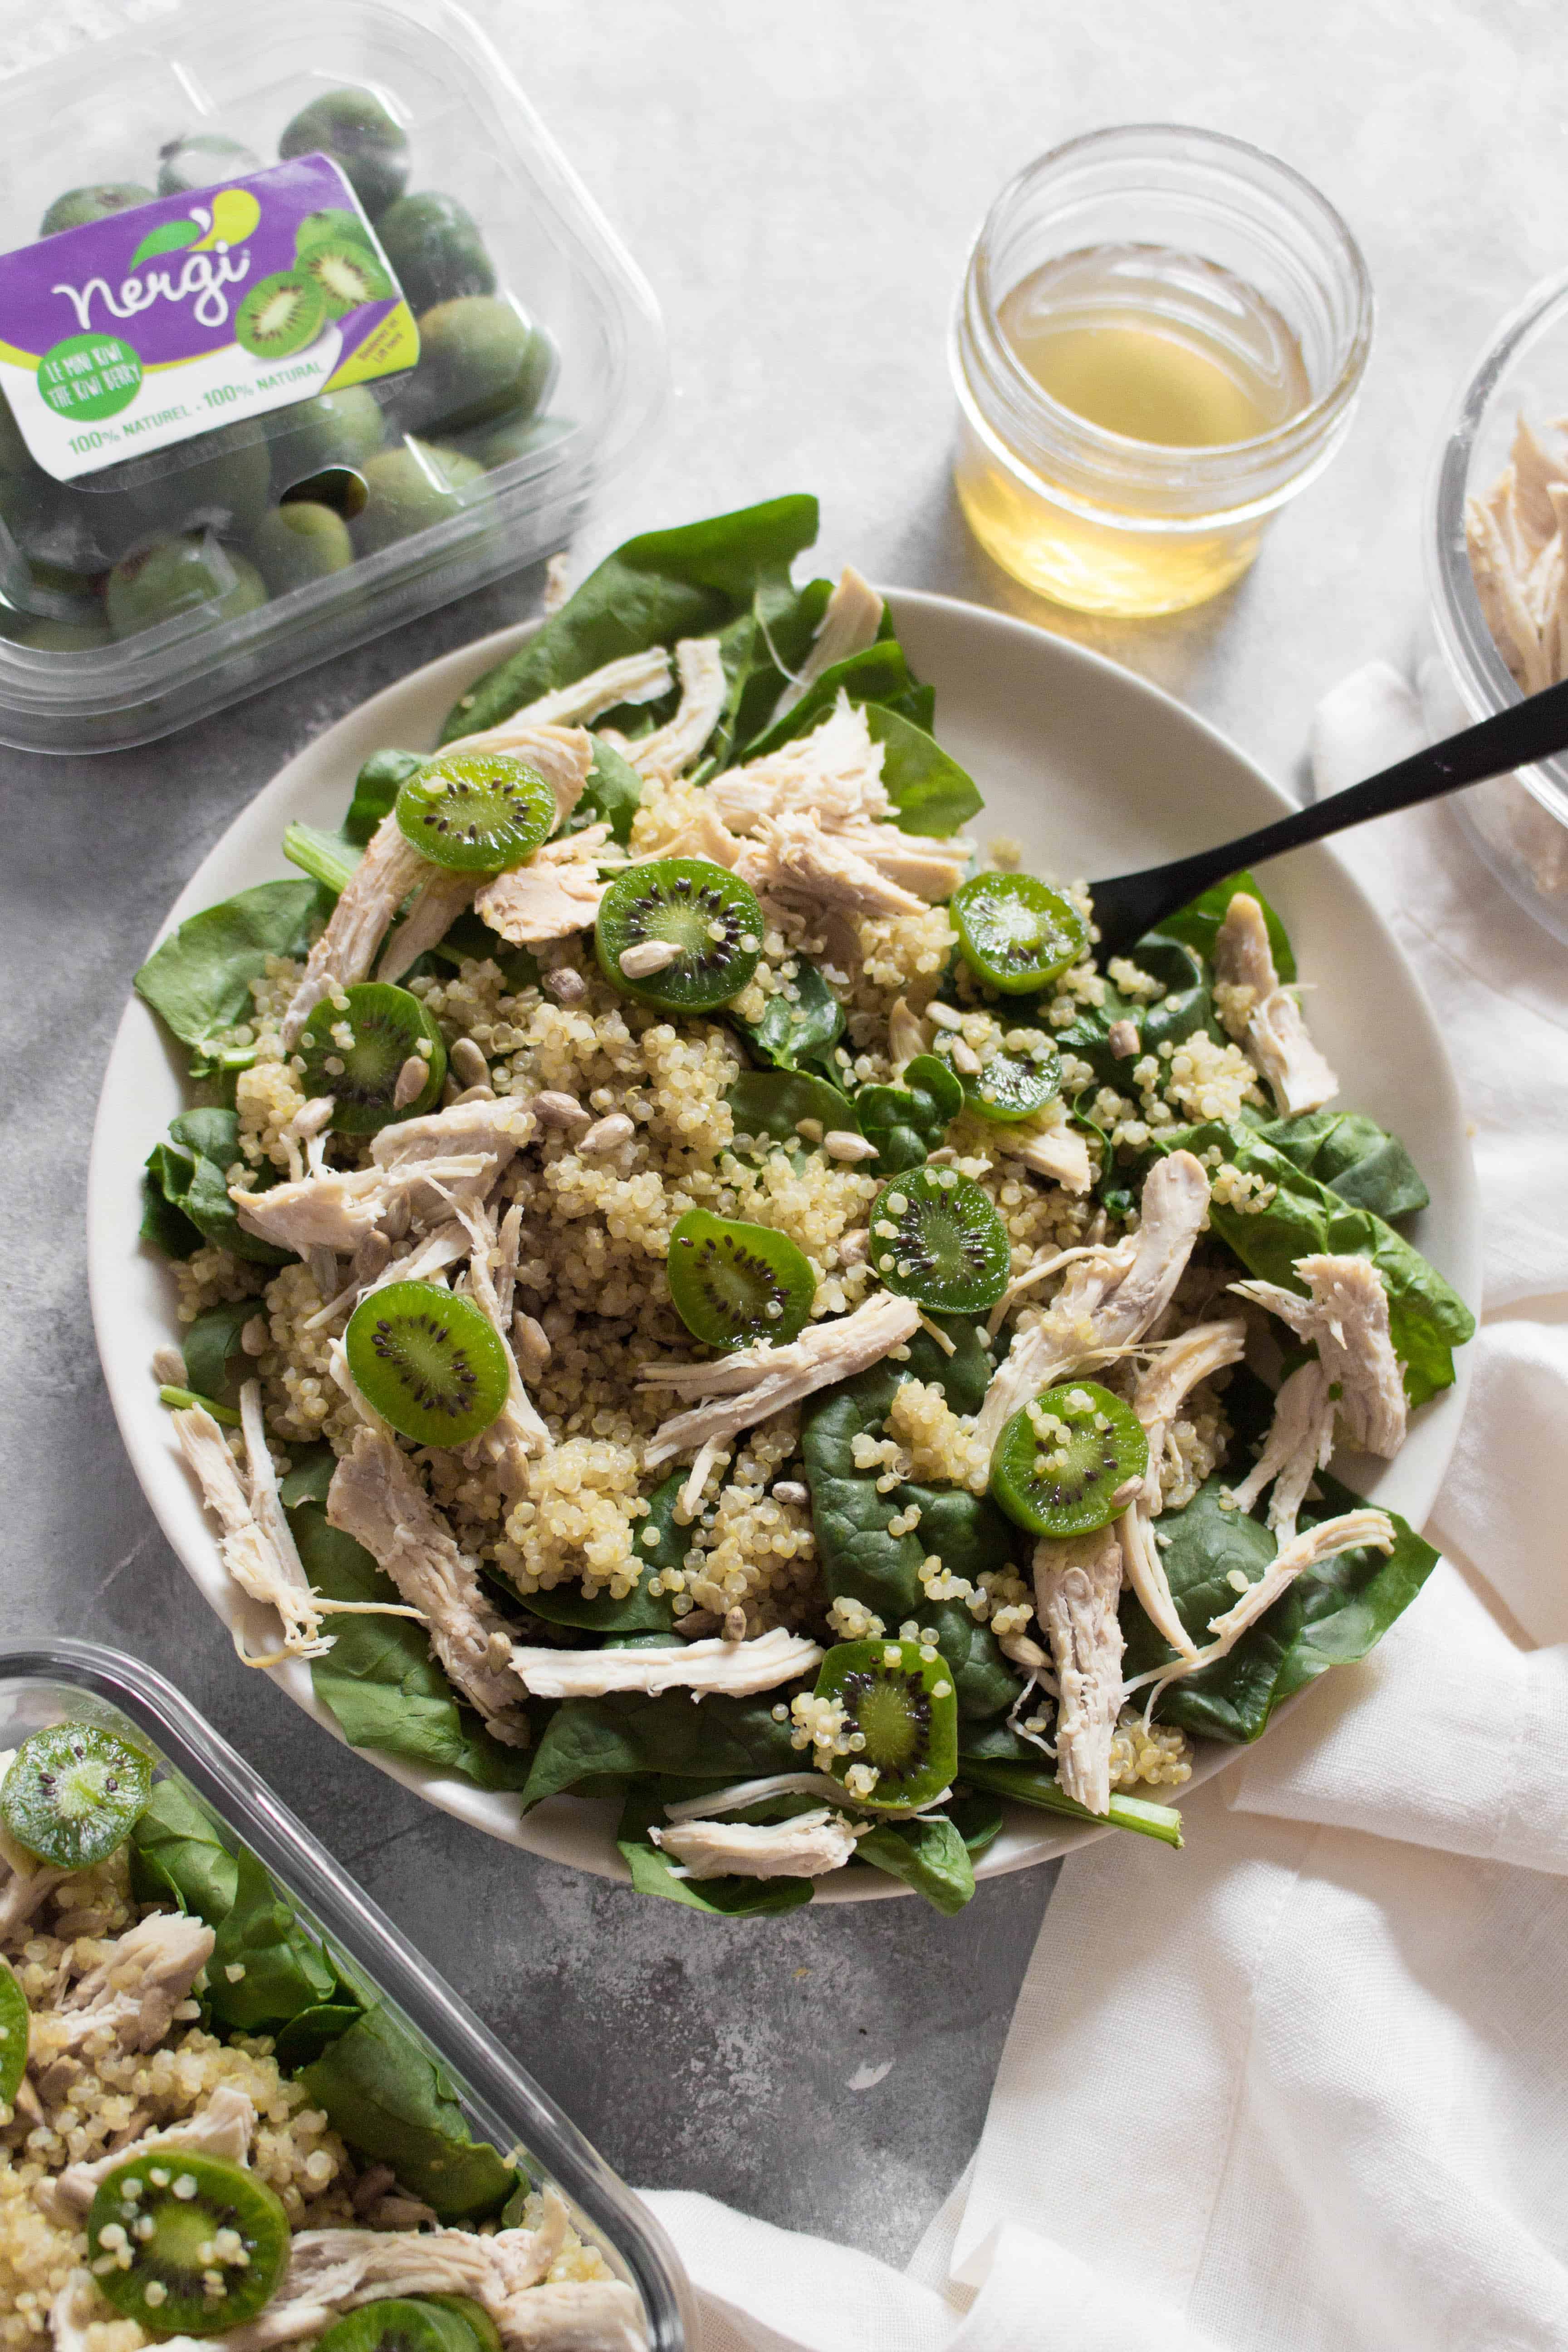 A mix of fresh fruit, quinoa, chicken, sunflower seeds, and spinach, this Quinoa Chicken Spinach Nergi Bowl comes together deliciously and makes the perfect meal prep for a refreshing lunch!